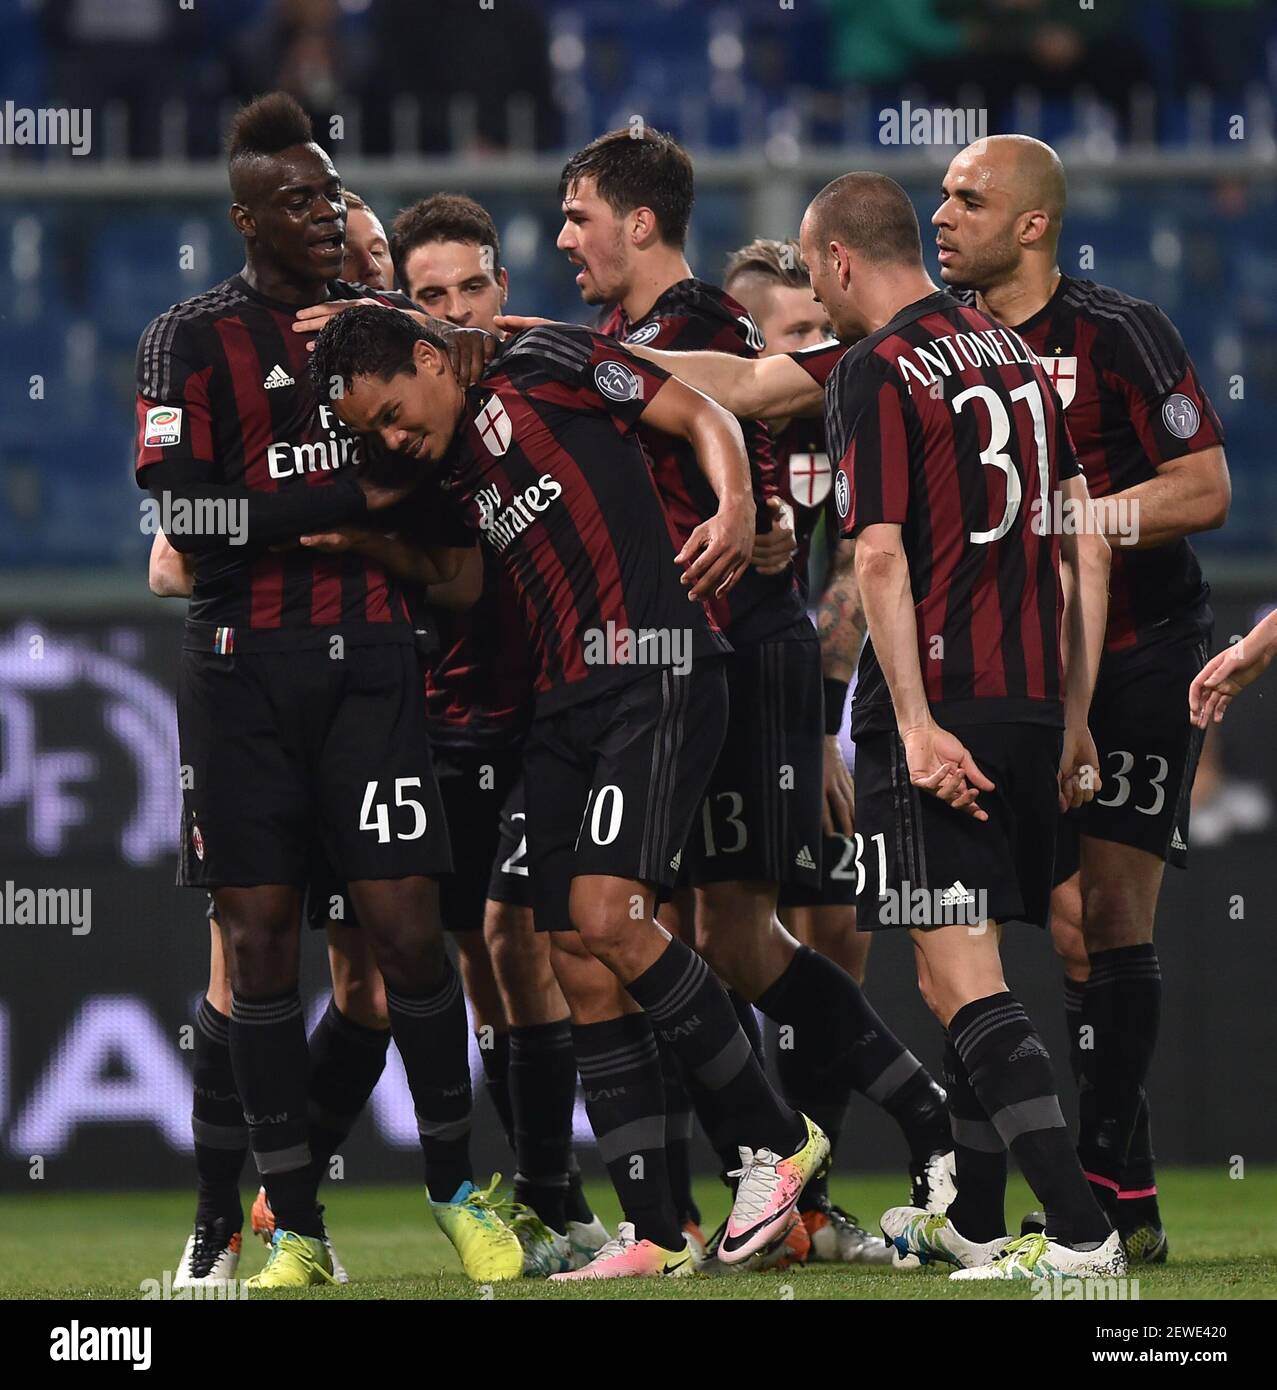 160418) -- GENOA, April 18, 2016 (Xinhua) -- Players of AC Milan celebrate  after scoring during the 2015-2016 season Serie A football match against  Sampdoria in Genoa, Italy, April 17, 2016. AC